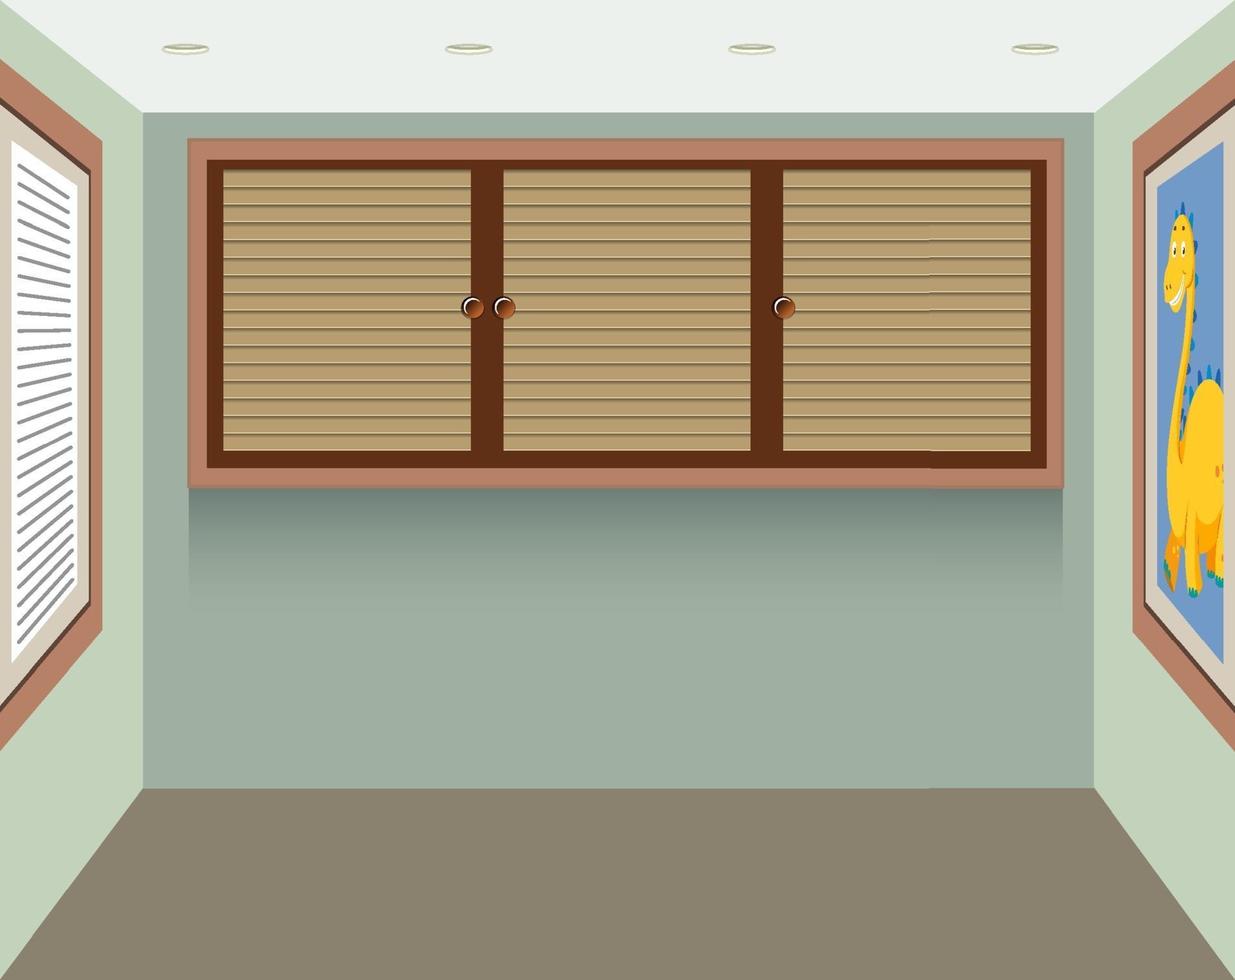 A small square room background vector